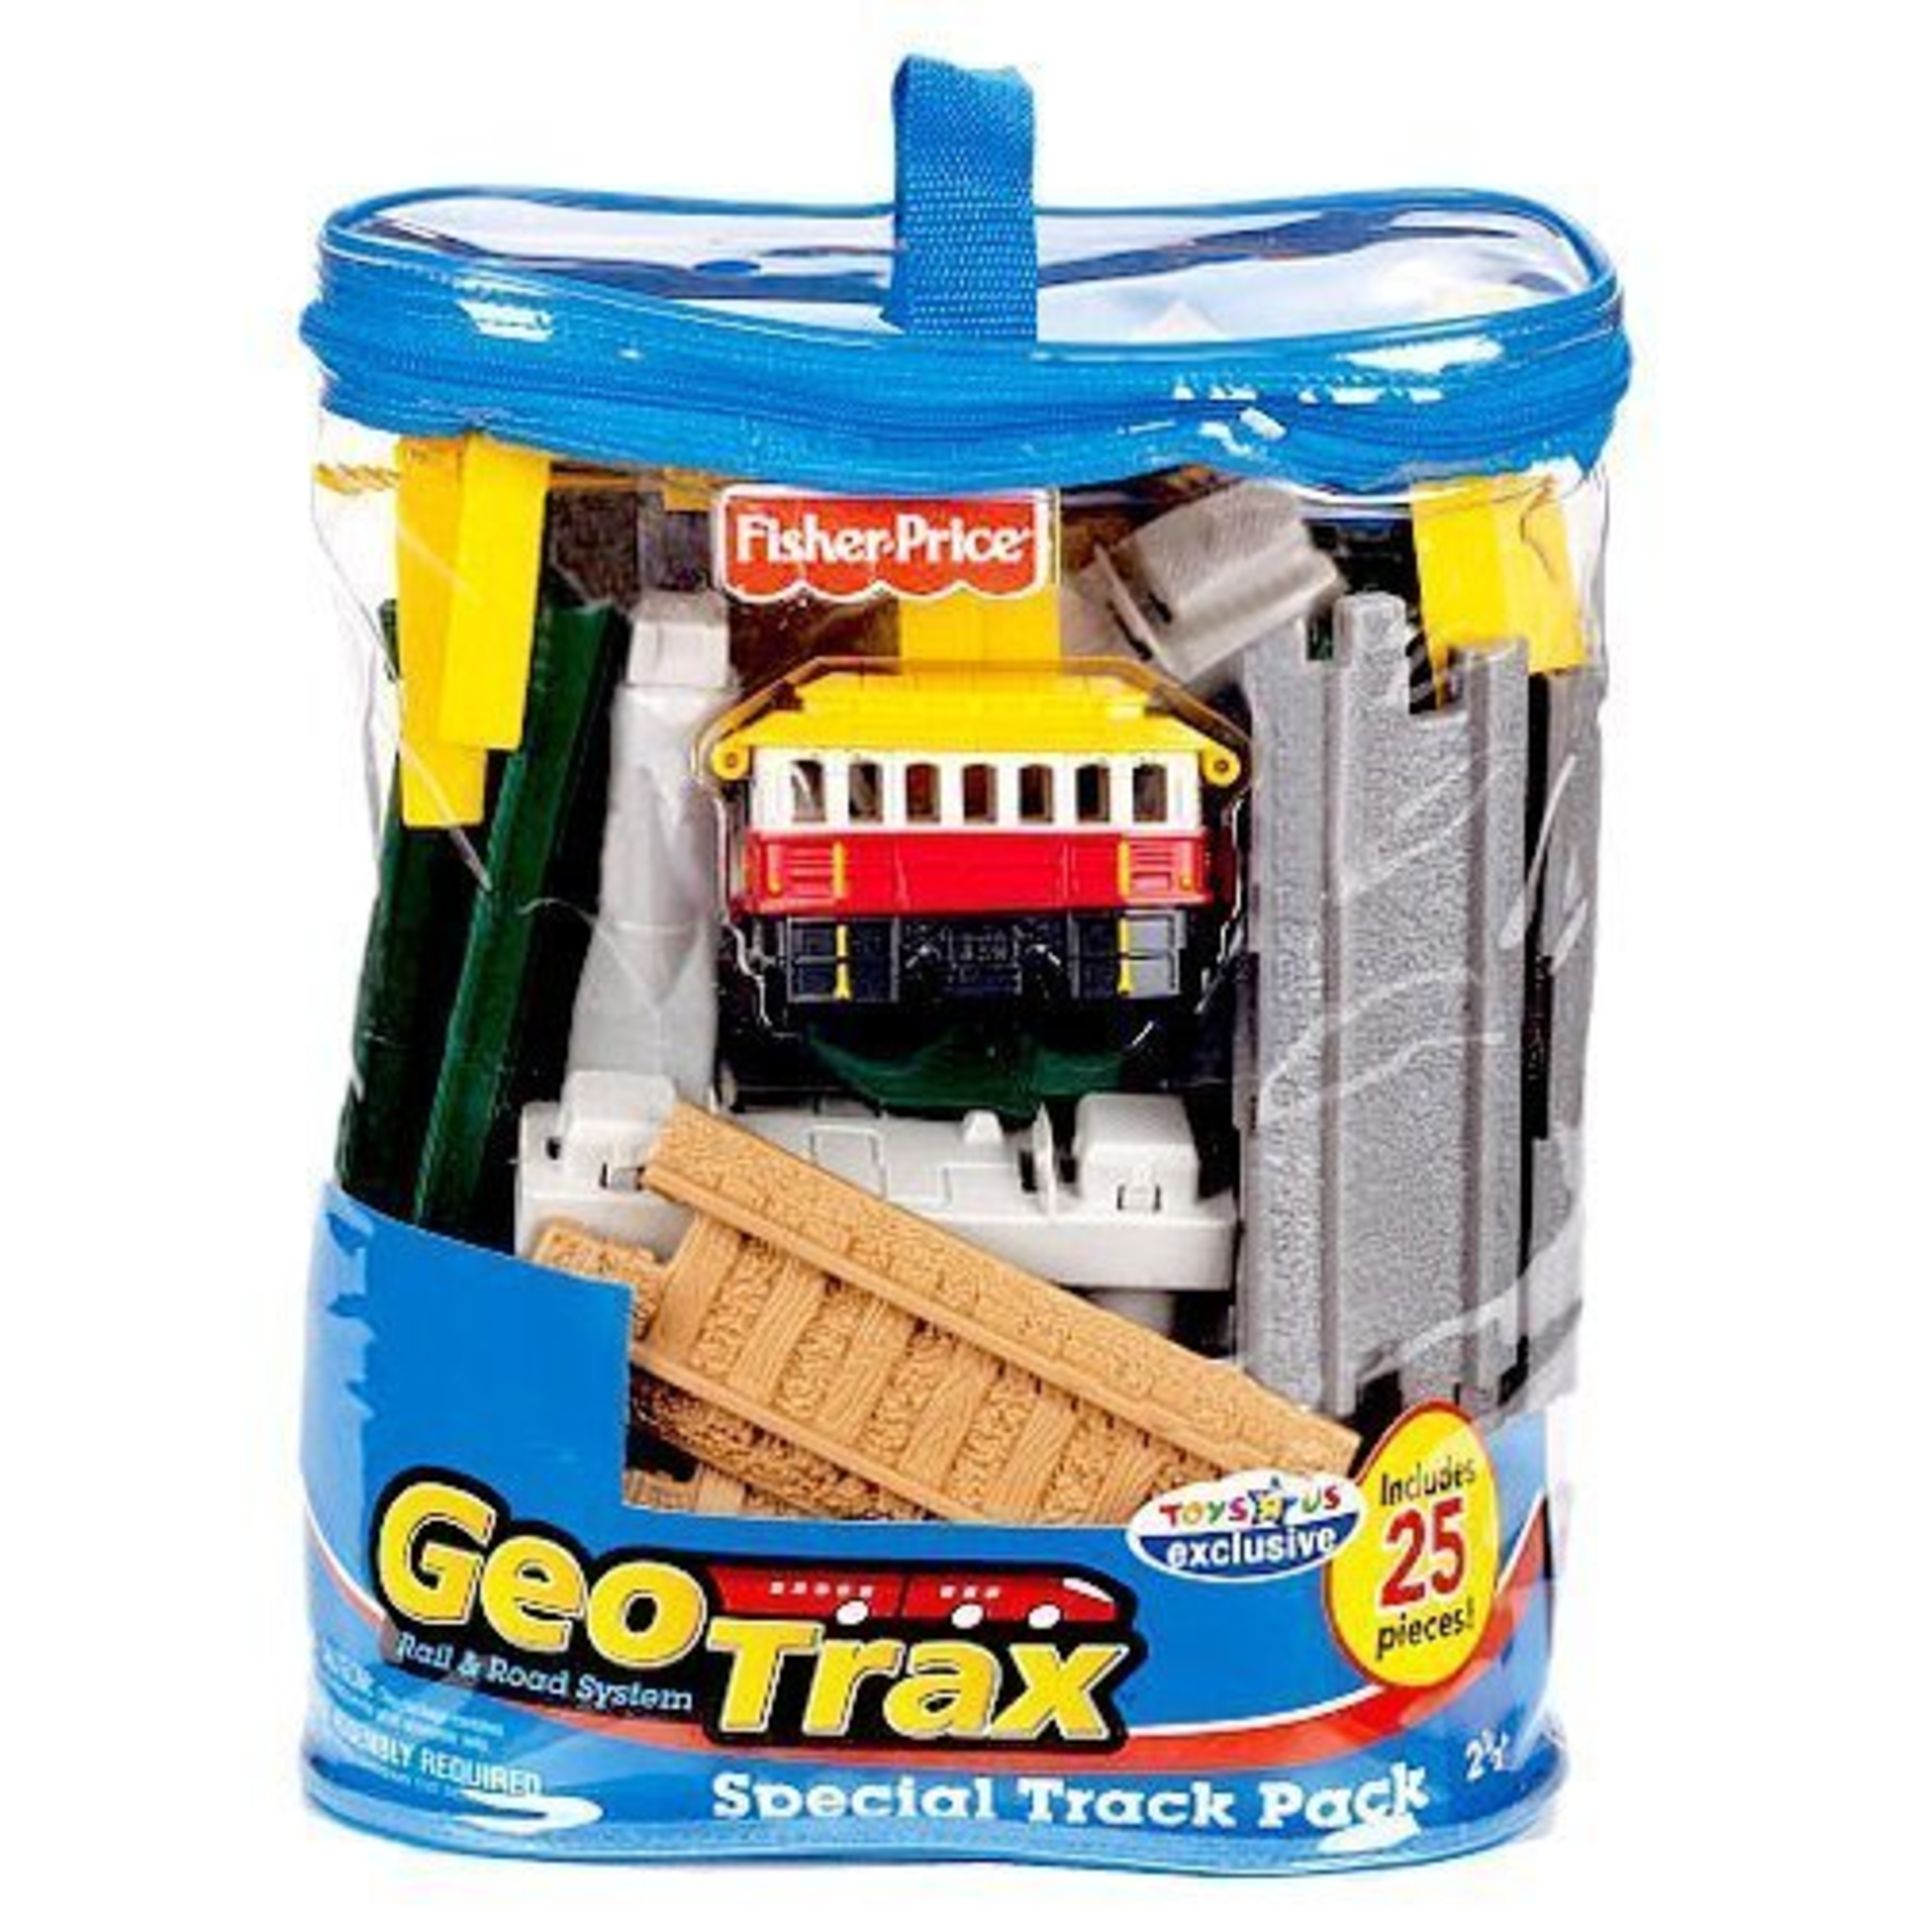 V Grade A Fisher-Price GeoTrax Special Track Pack incl. 25 Pieces In Carry Case RRP £25.99 X 2